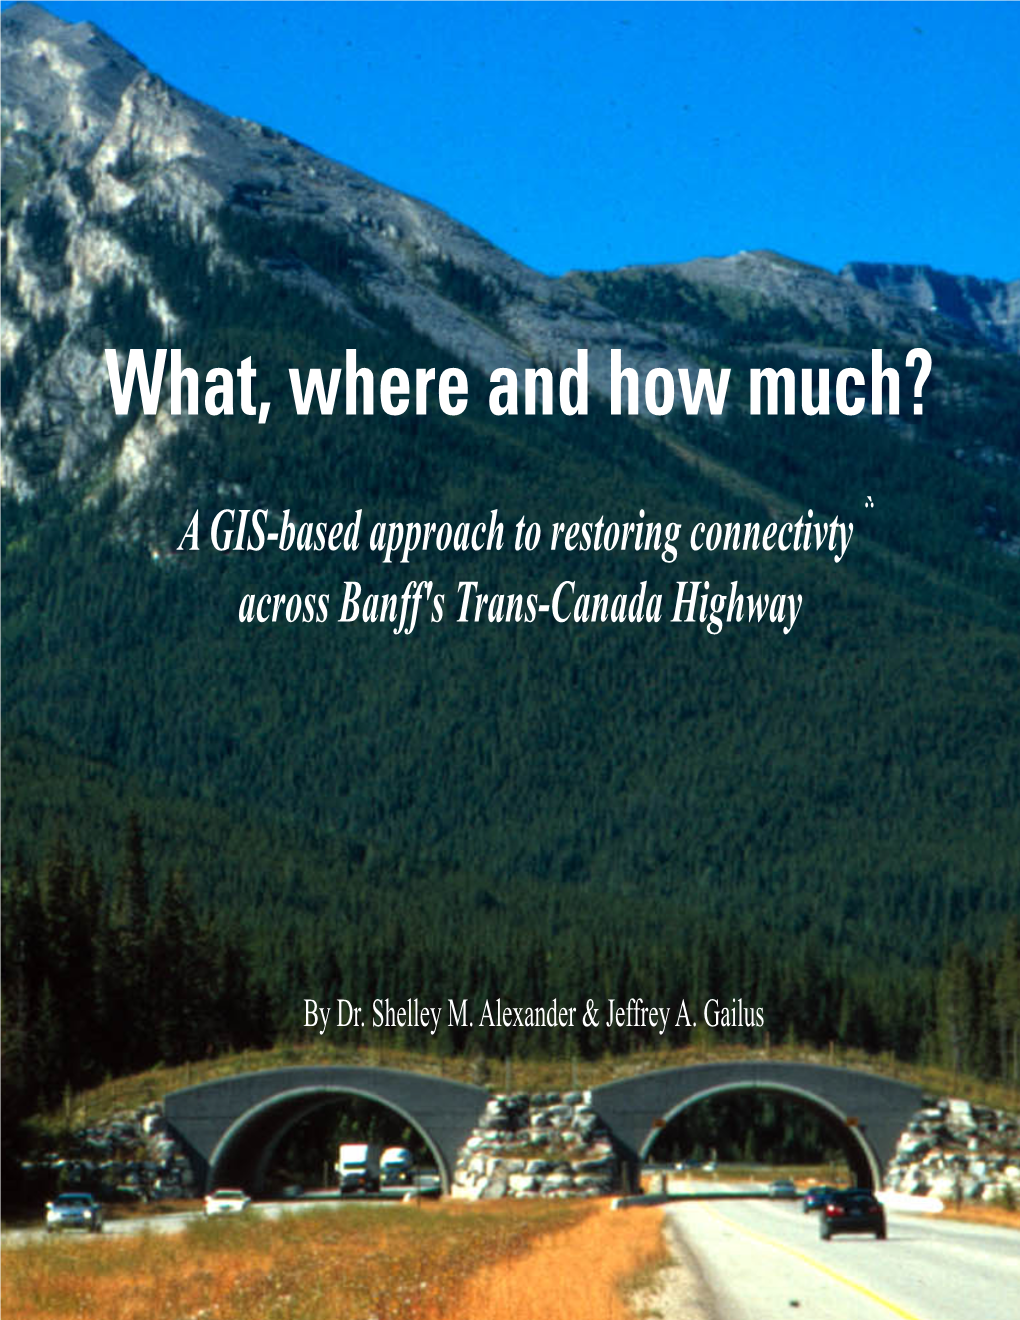 A GIS-Based Approach to Restoring Connectivty Across Banff's Trans-Canada Highway